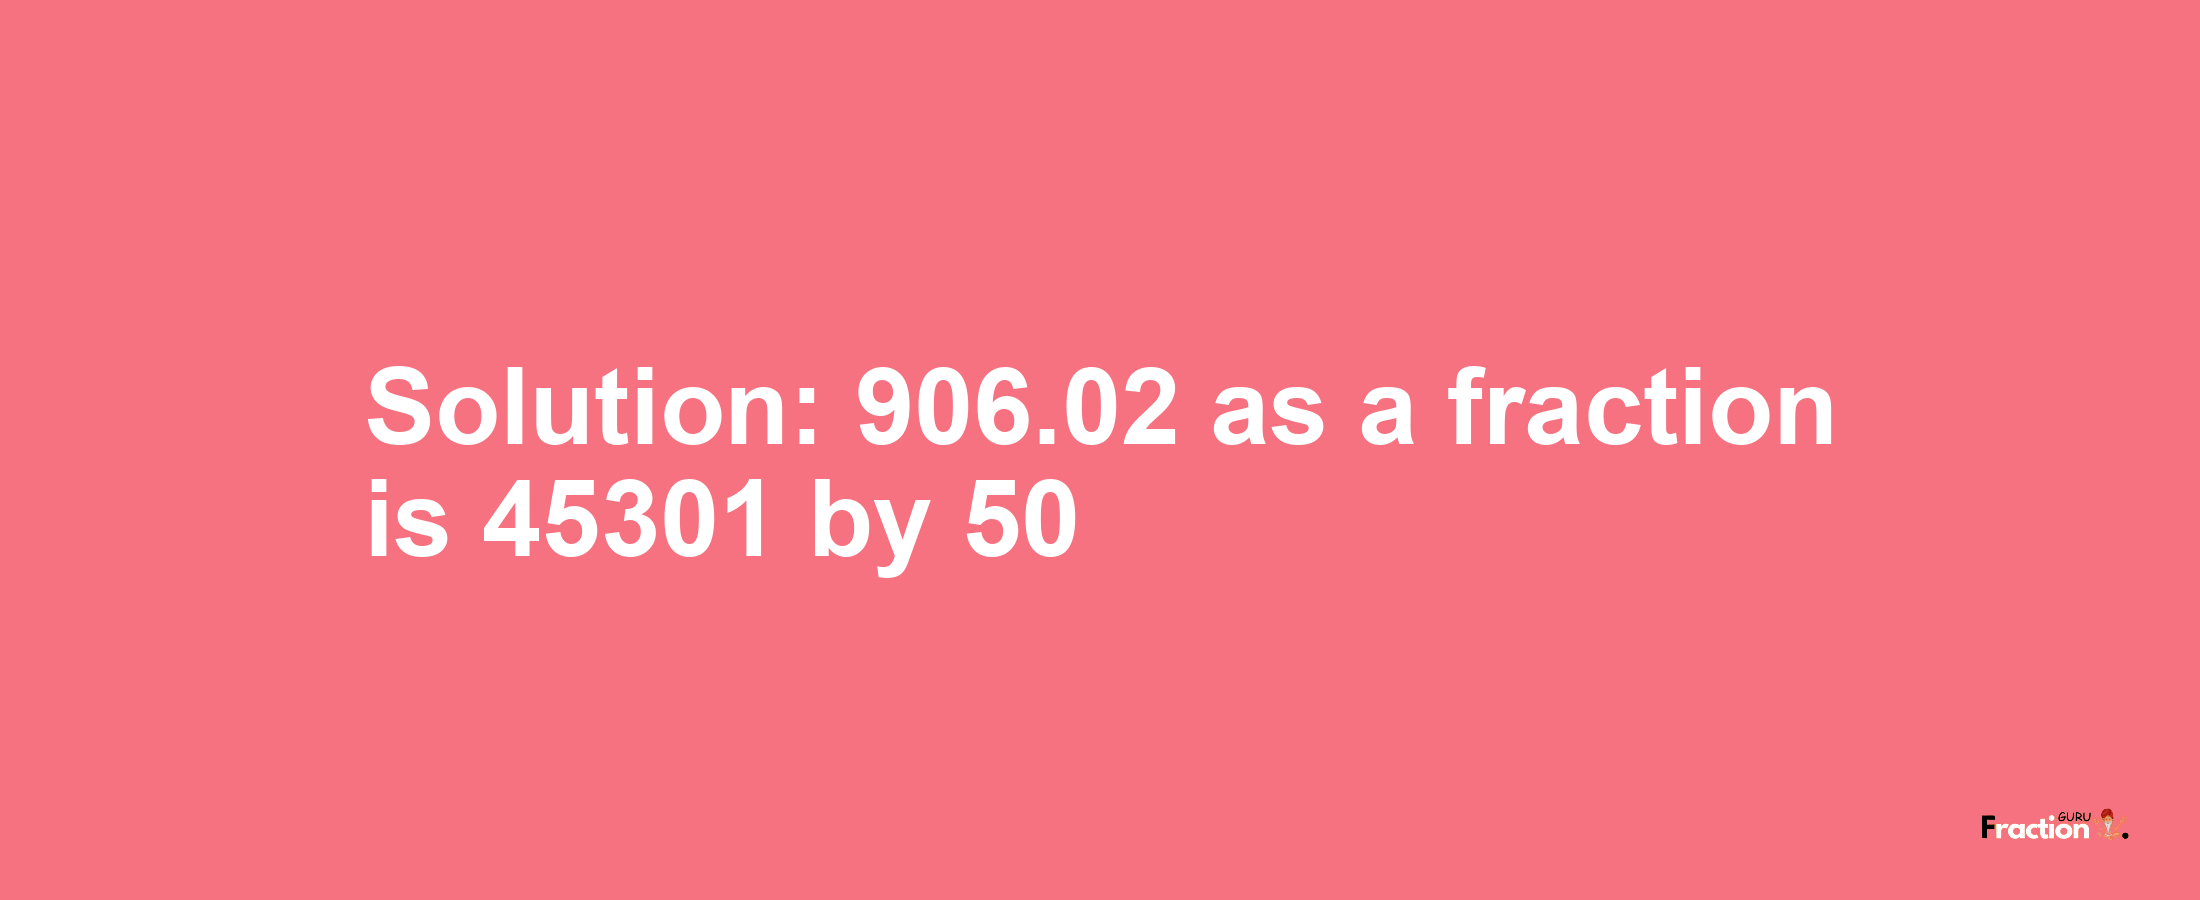 Solution:906.02 as a fraction is 45301/50